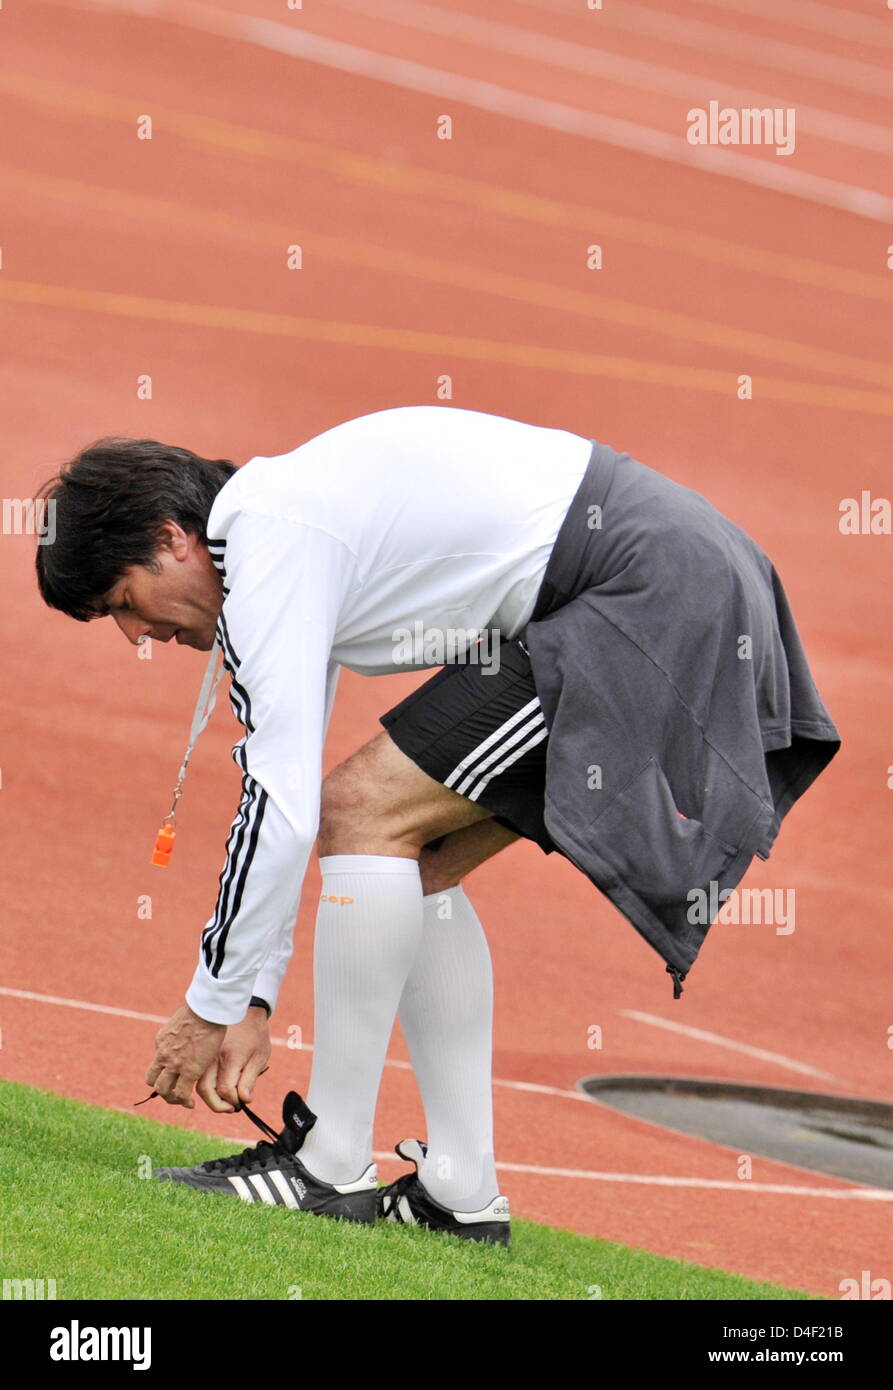 Head coach Joachim Loew of Germany binding his shoes during a training session of German national soccer squad in Tenero near Locarno, Switzerland, 06 June 2008. Team Germany is currently preparing for EURO 2008 soccer tournament. Photo: Peter Kneffel dpa +++###dpa###+++ Stock Photo